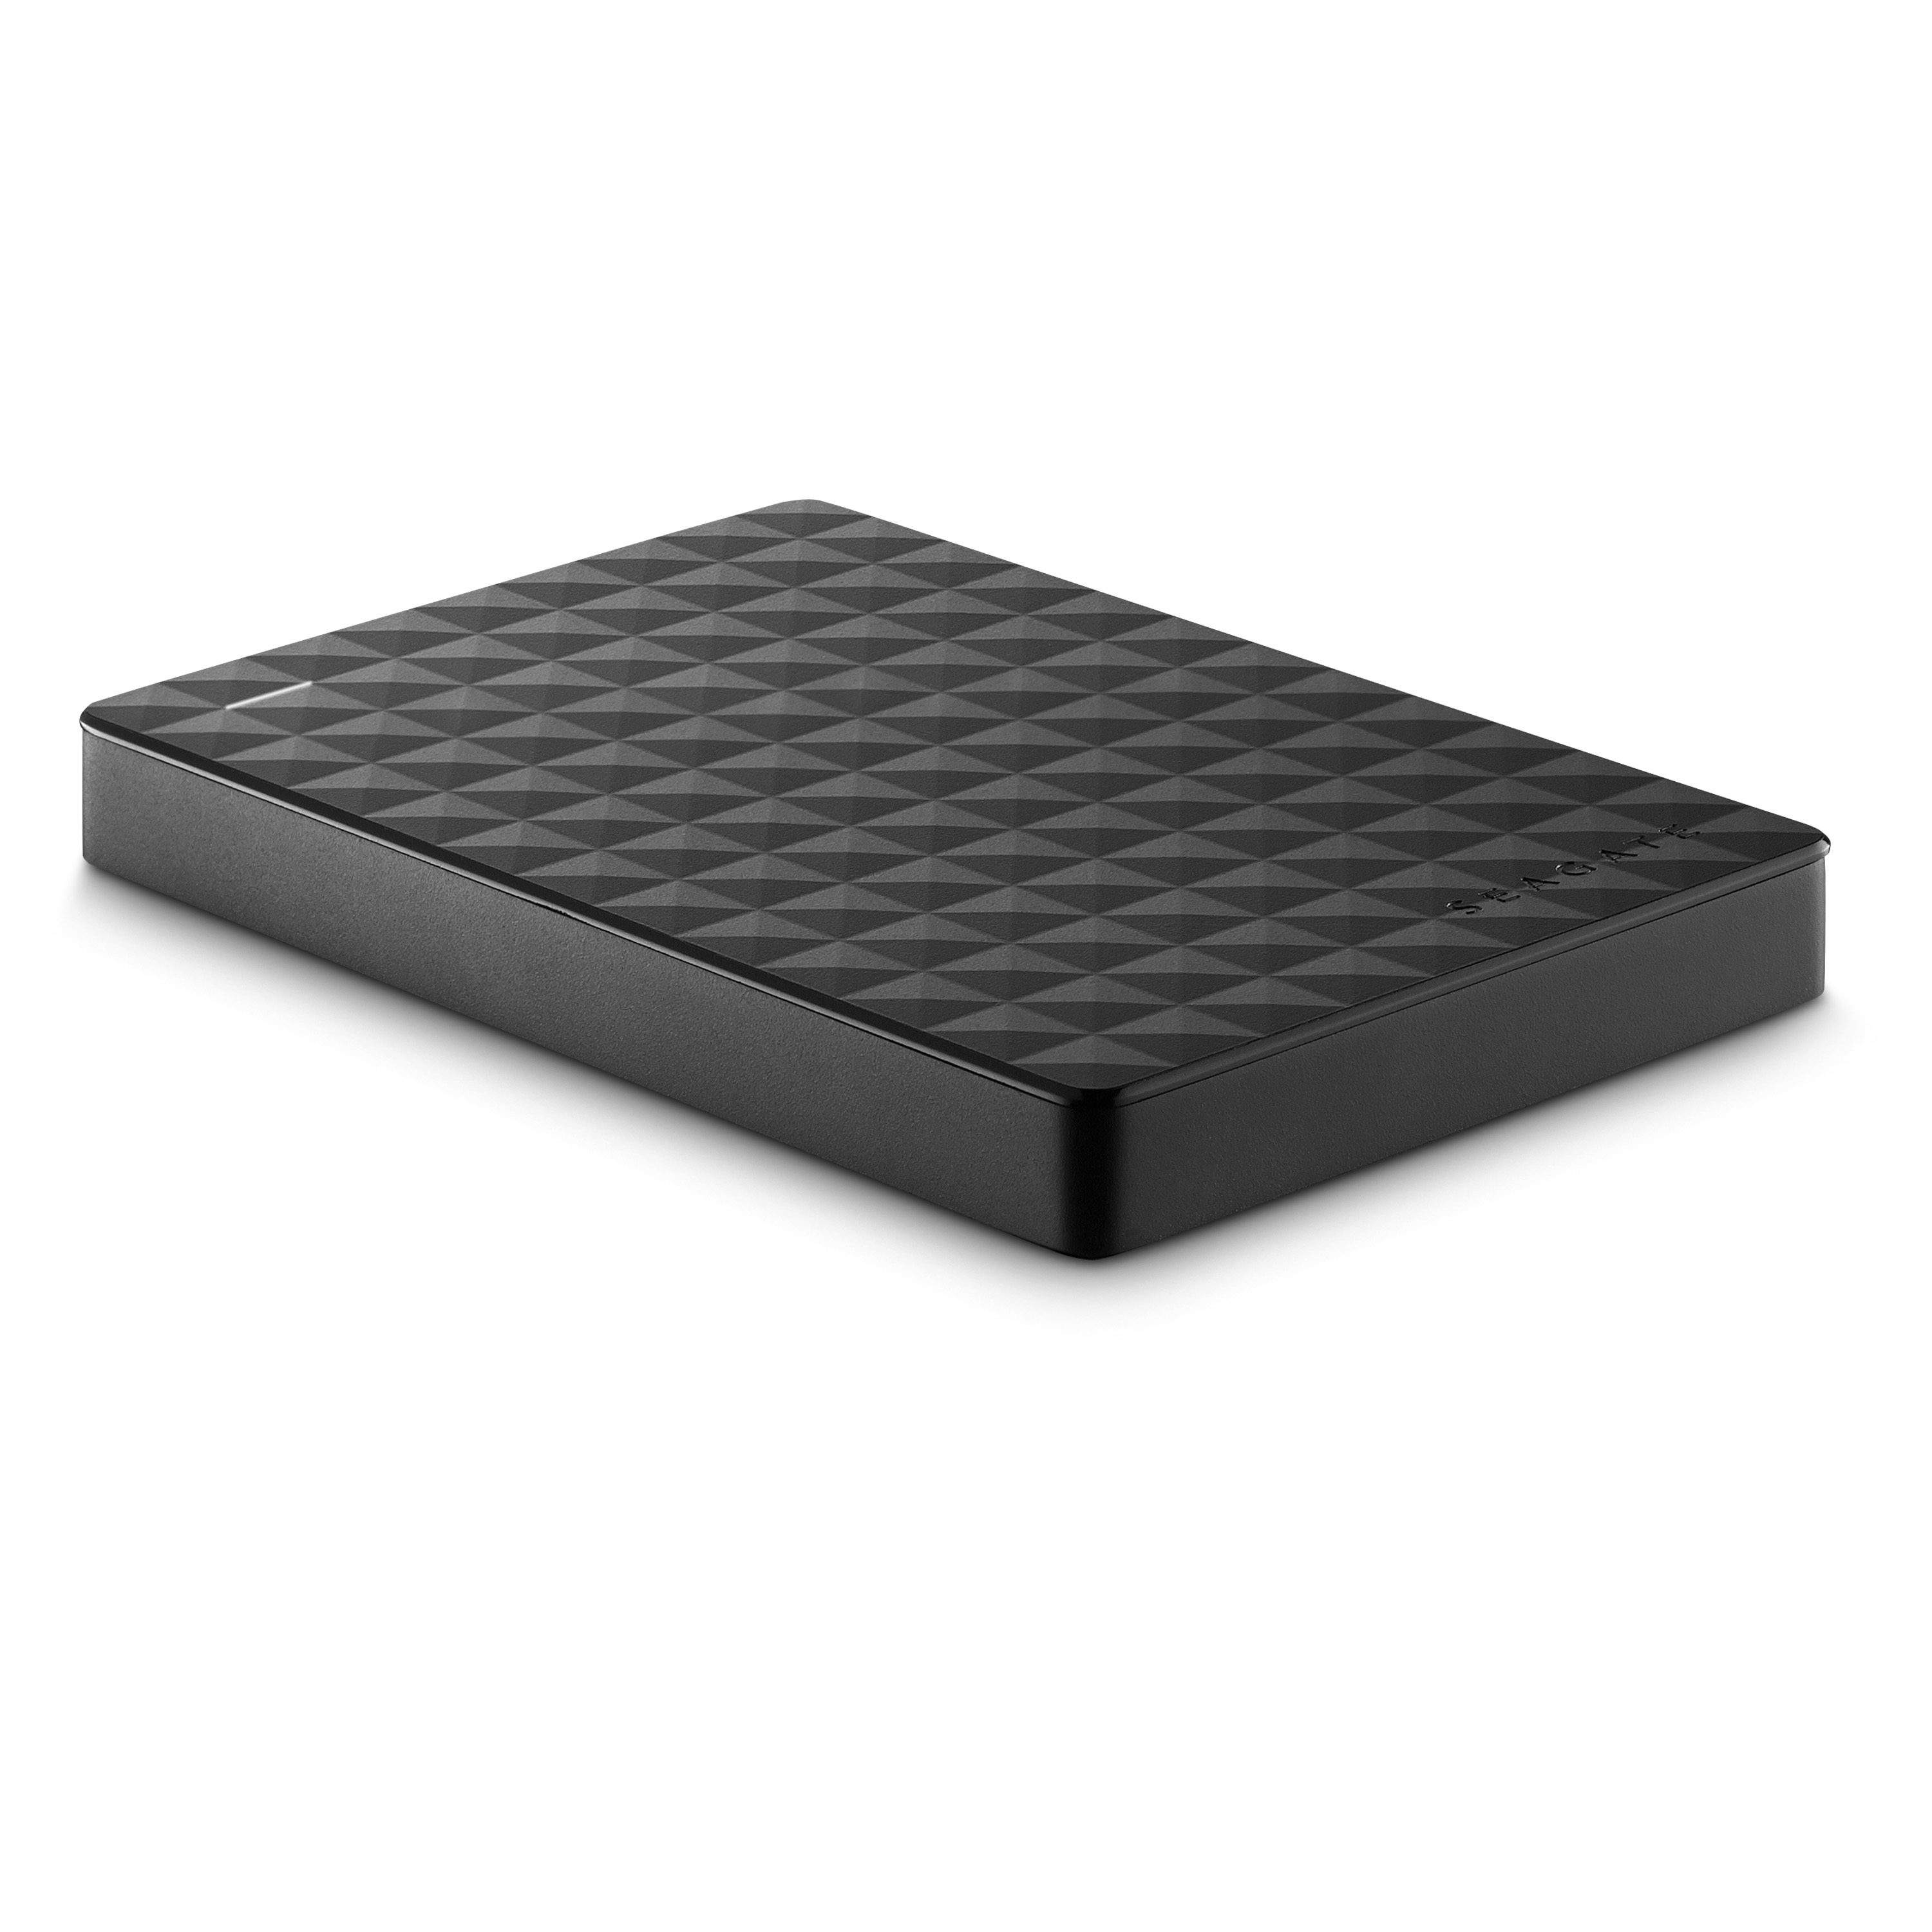 Disco HDD Externo SEAGATE Expansion (Negro - 2 TB - USB 3.0)